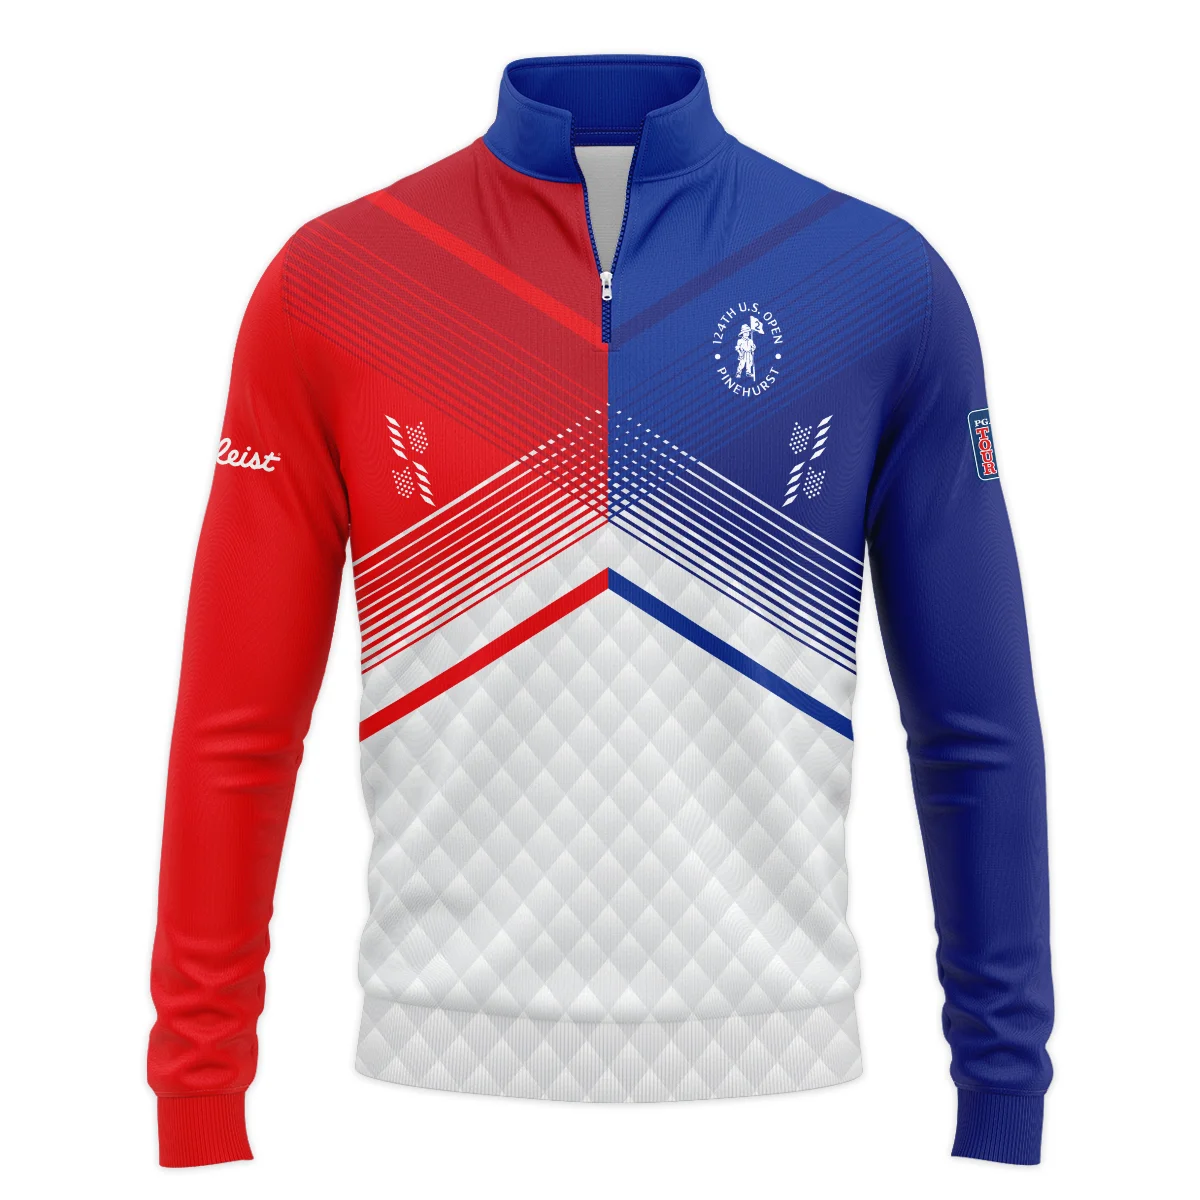 Titleist 124th U.S. Open Pinehurst Blue Red Line White Abstract Hoodie Shirt Style Classic